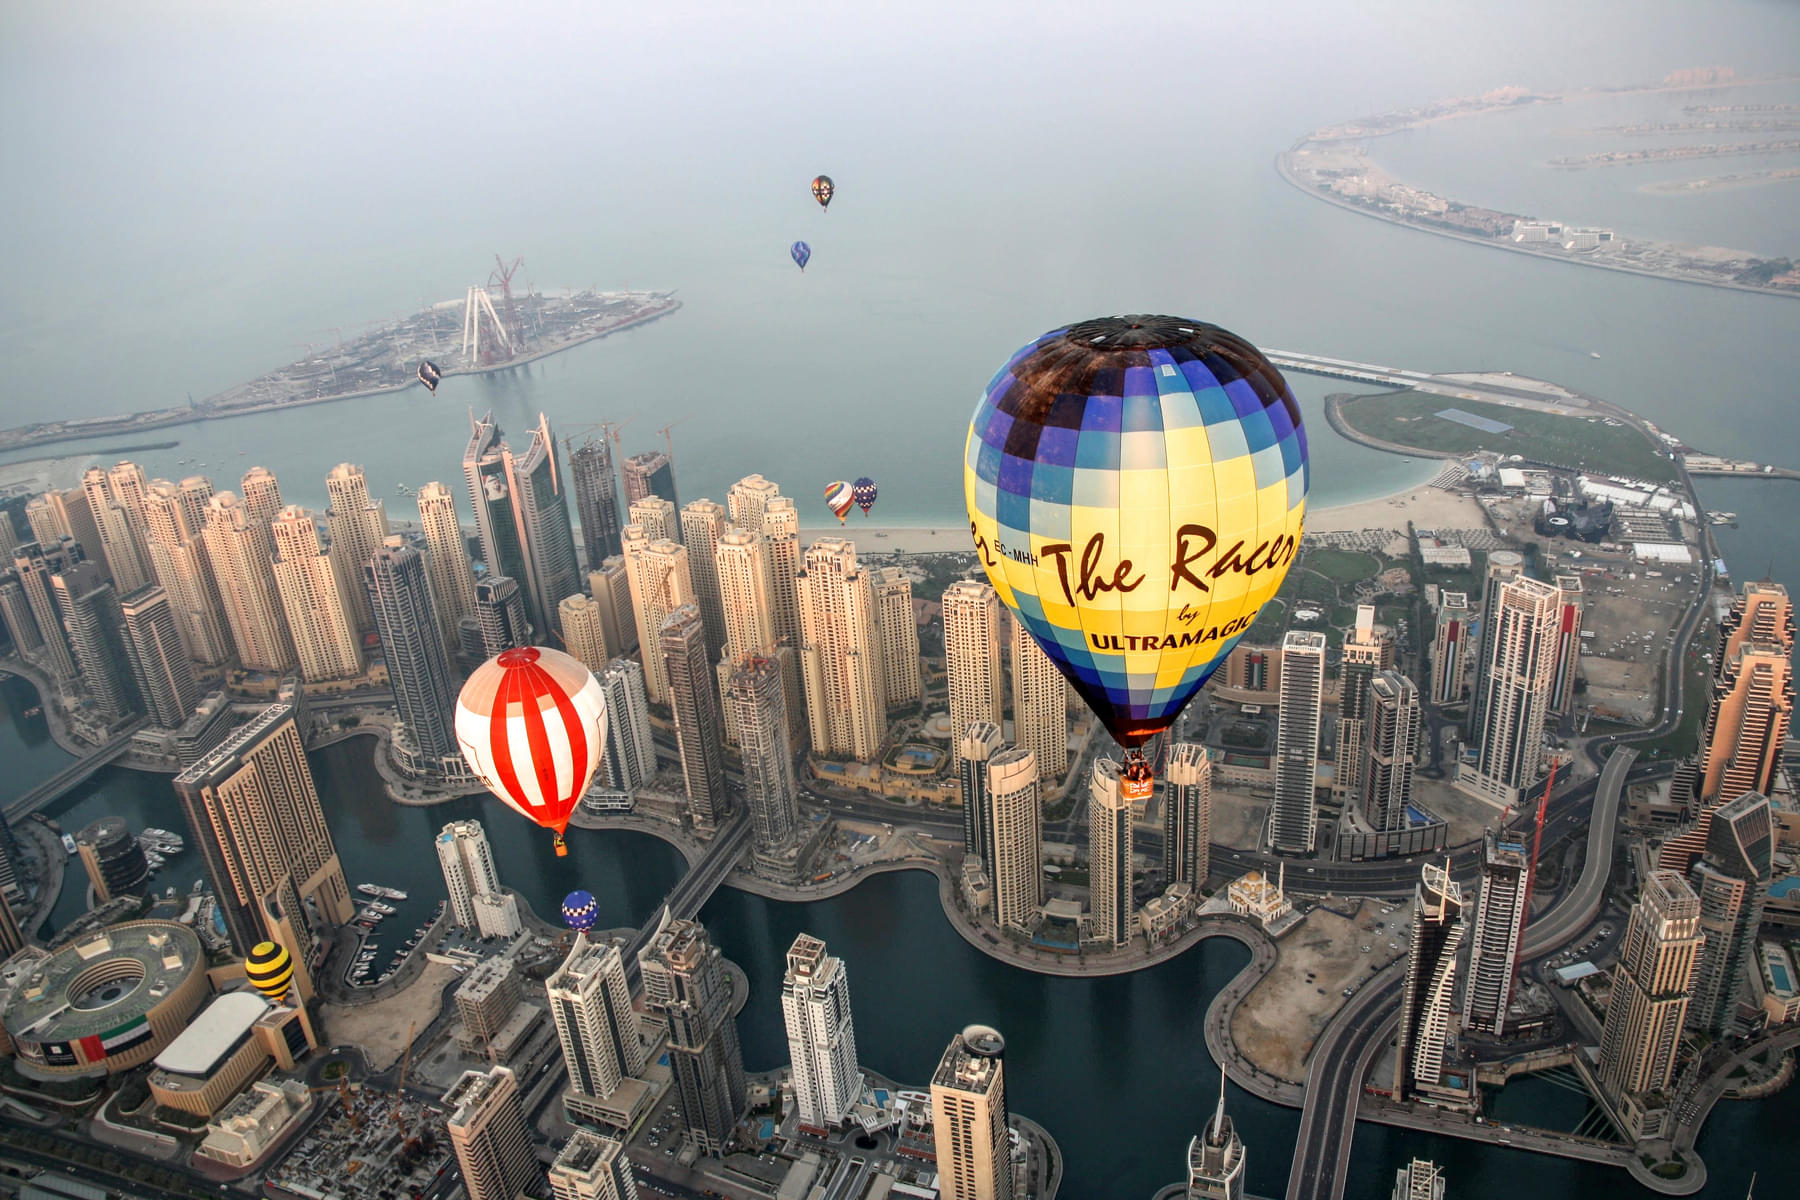 What to Expect at Hot Air Balloon Ride in Dubai